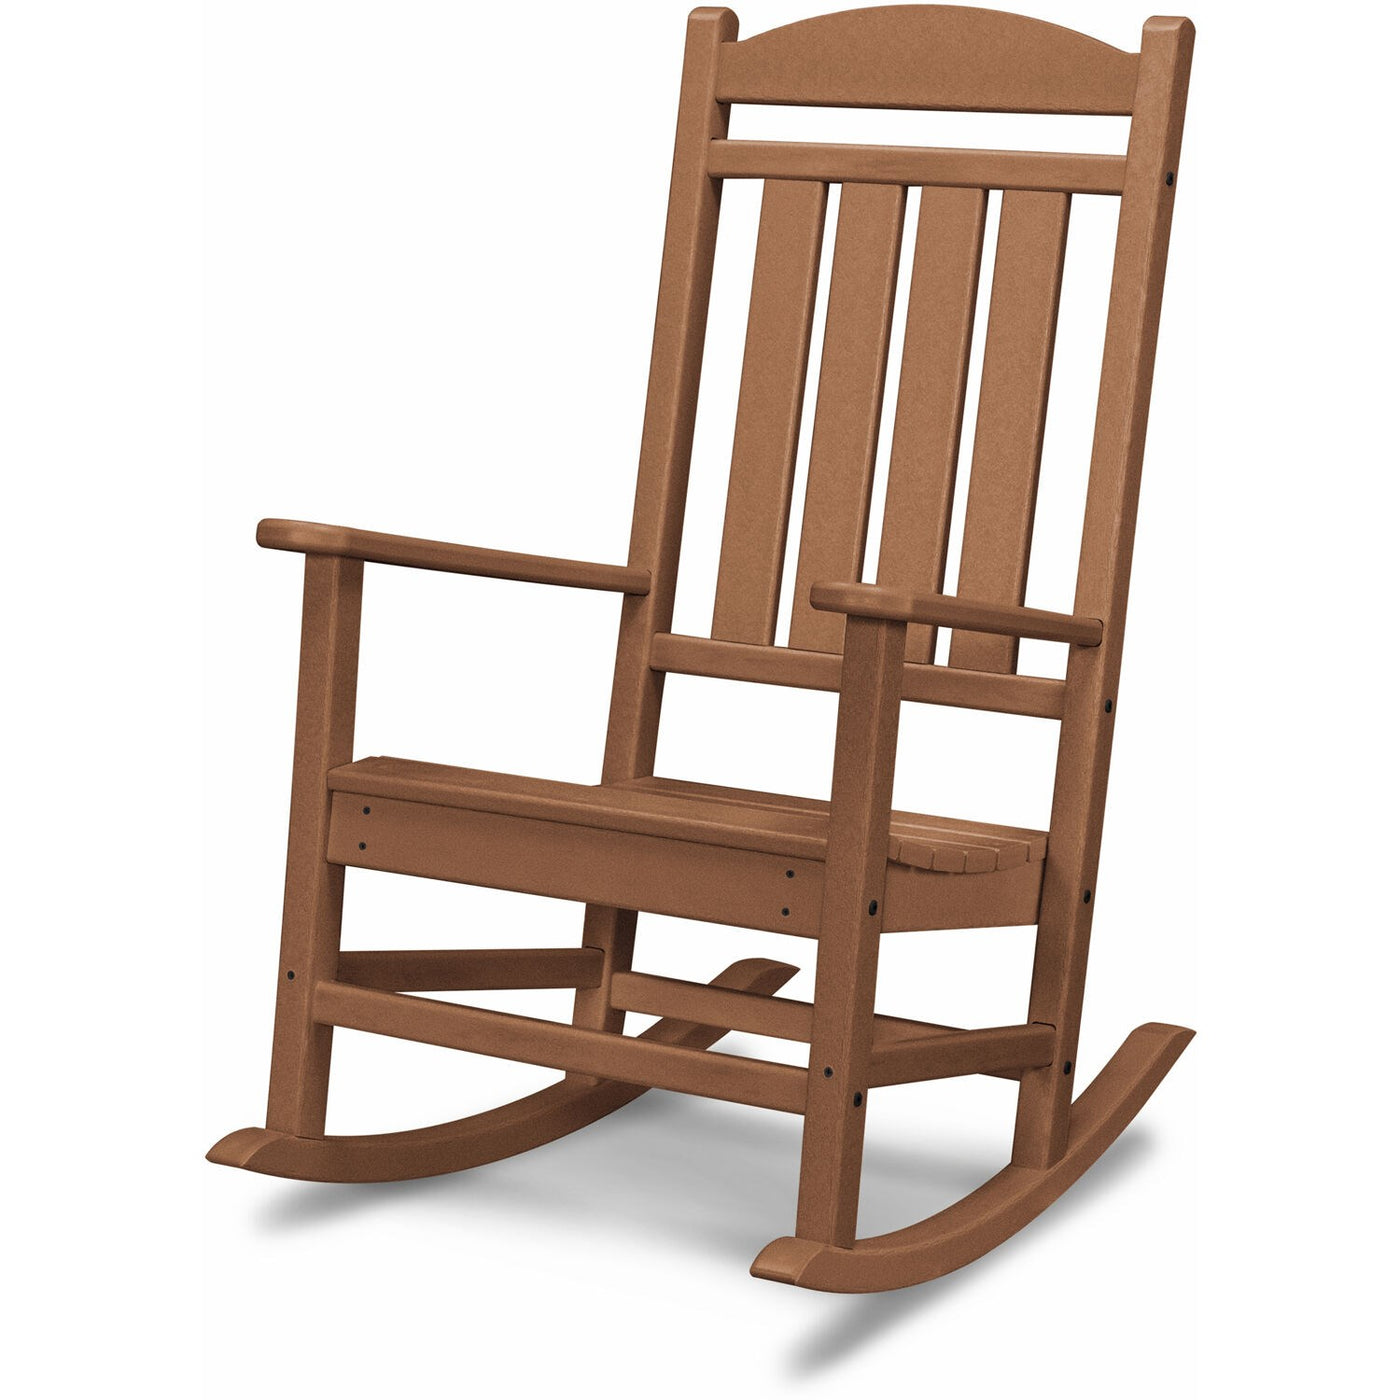 Hanover All-Weather Porch Rocker Set: 2 Porch Rockers and Side Table - Teak